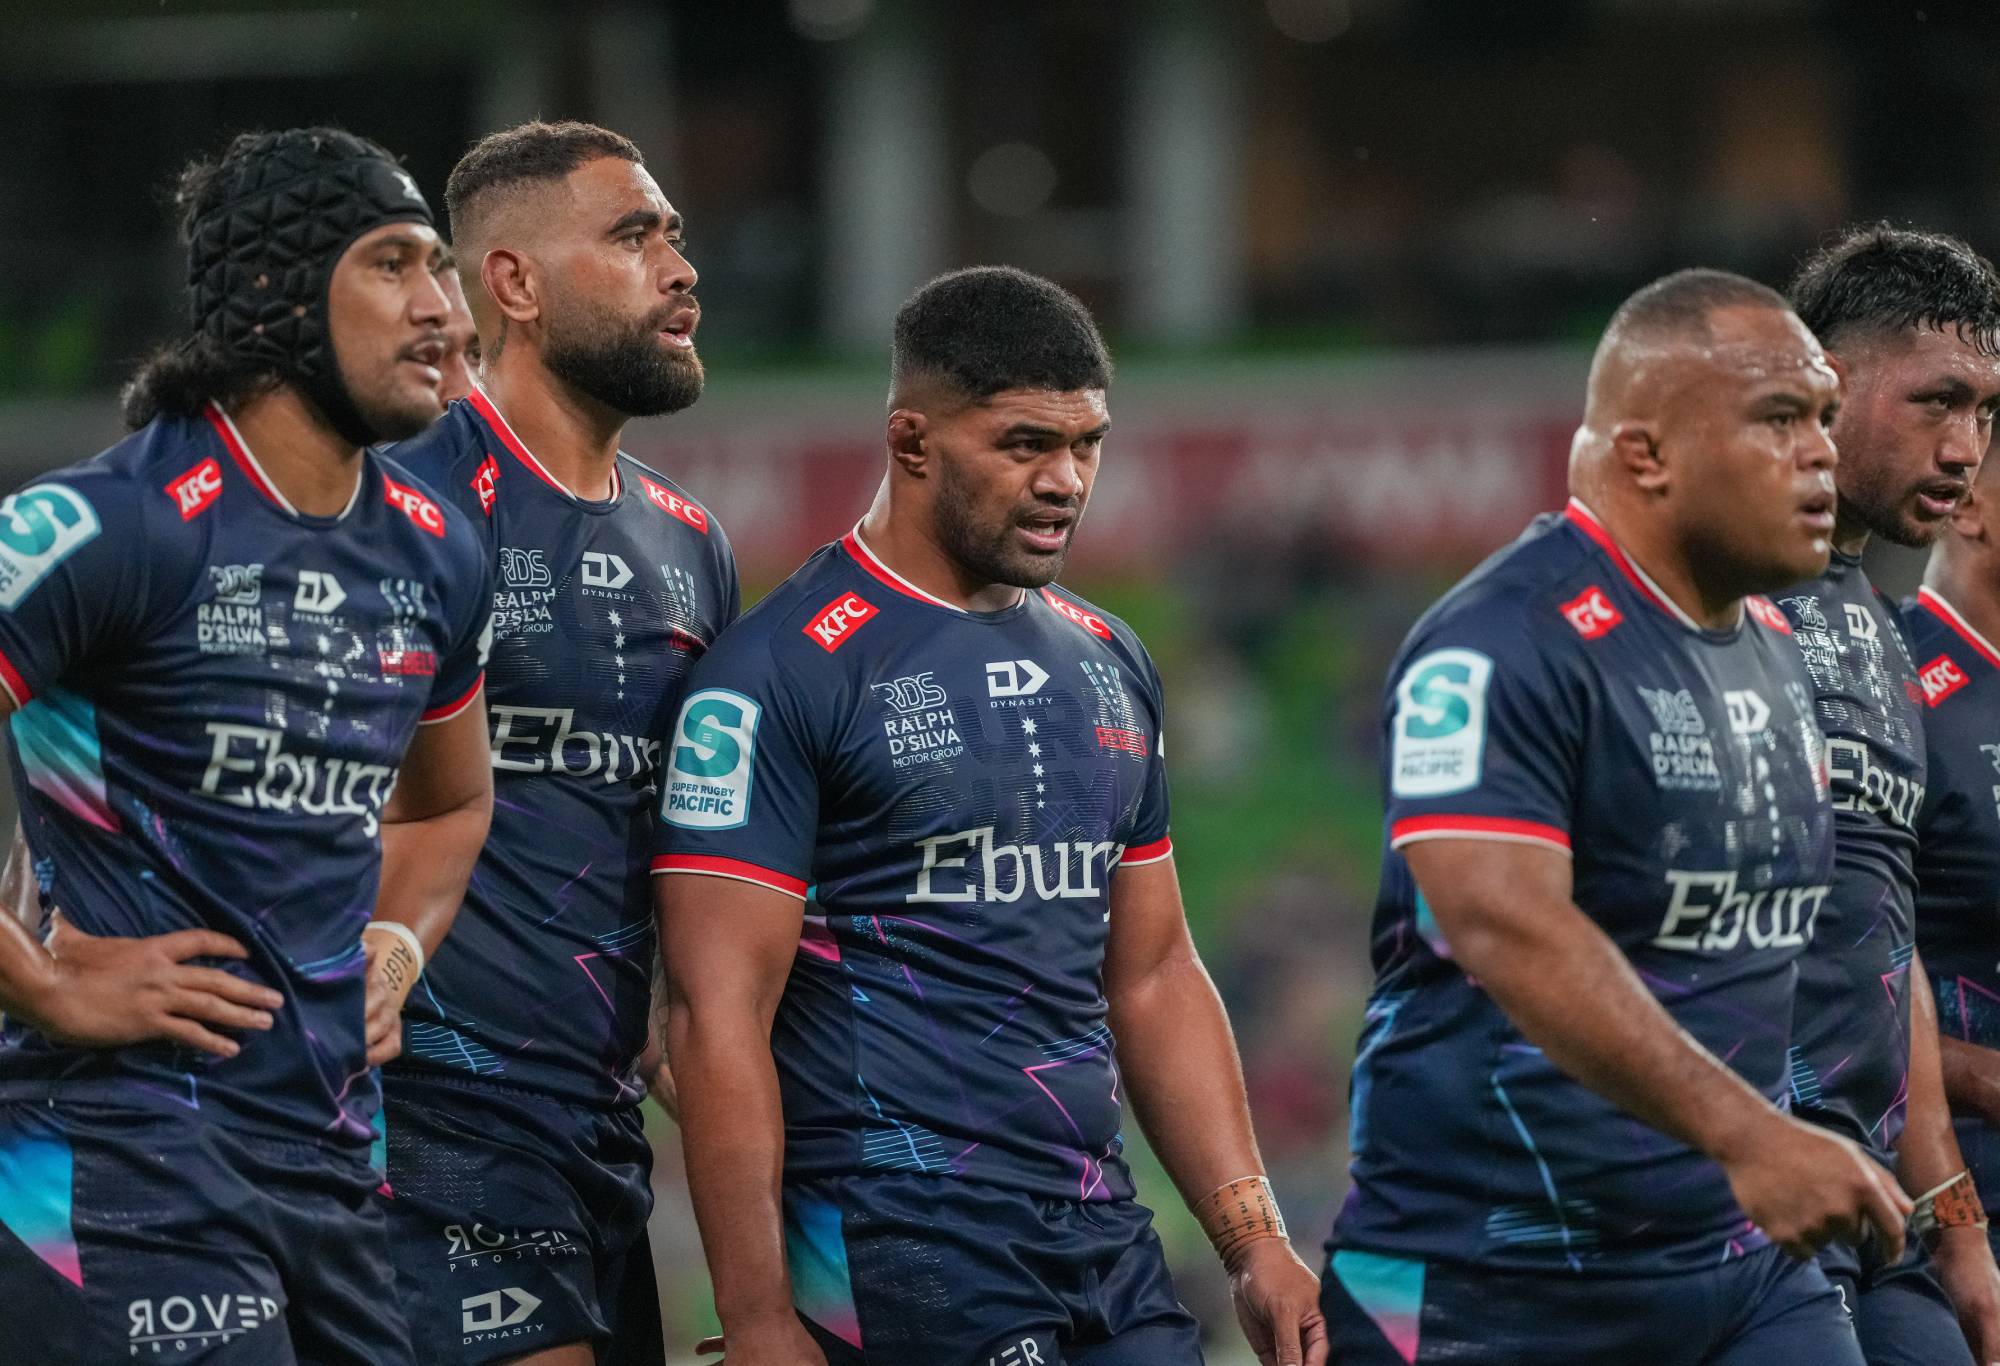 ANALYSIS: The Rebels must change their breakdown strategy if they are compete against Kiwi opposition